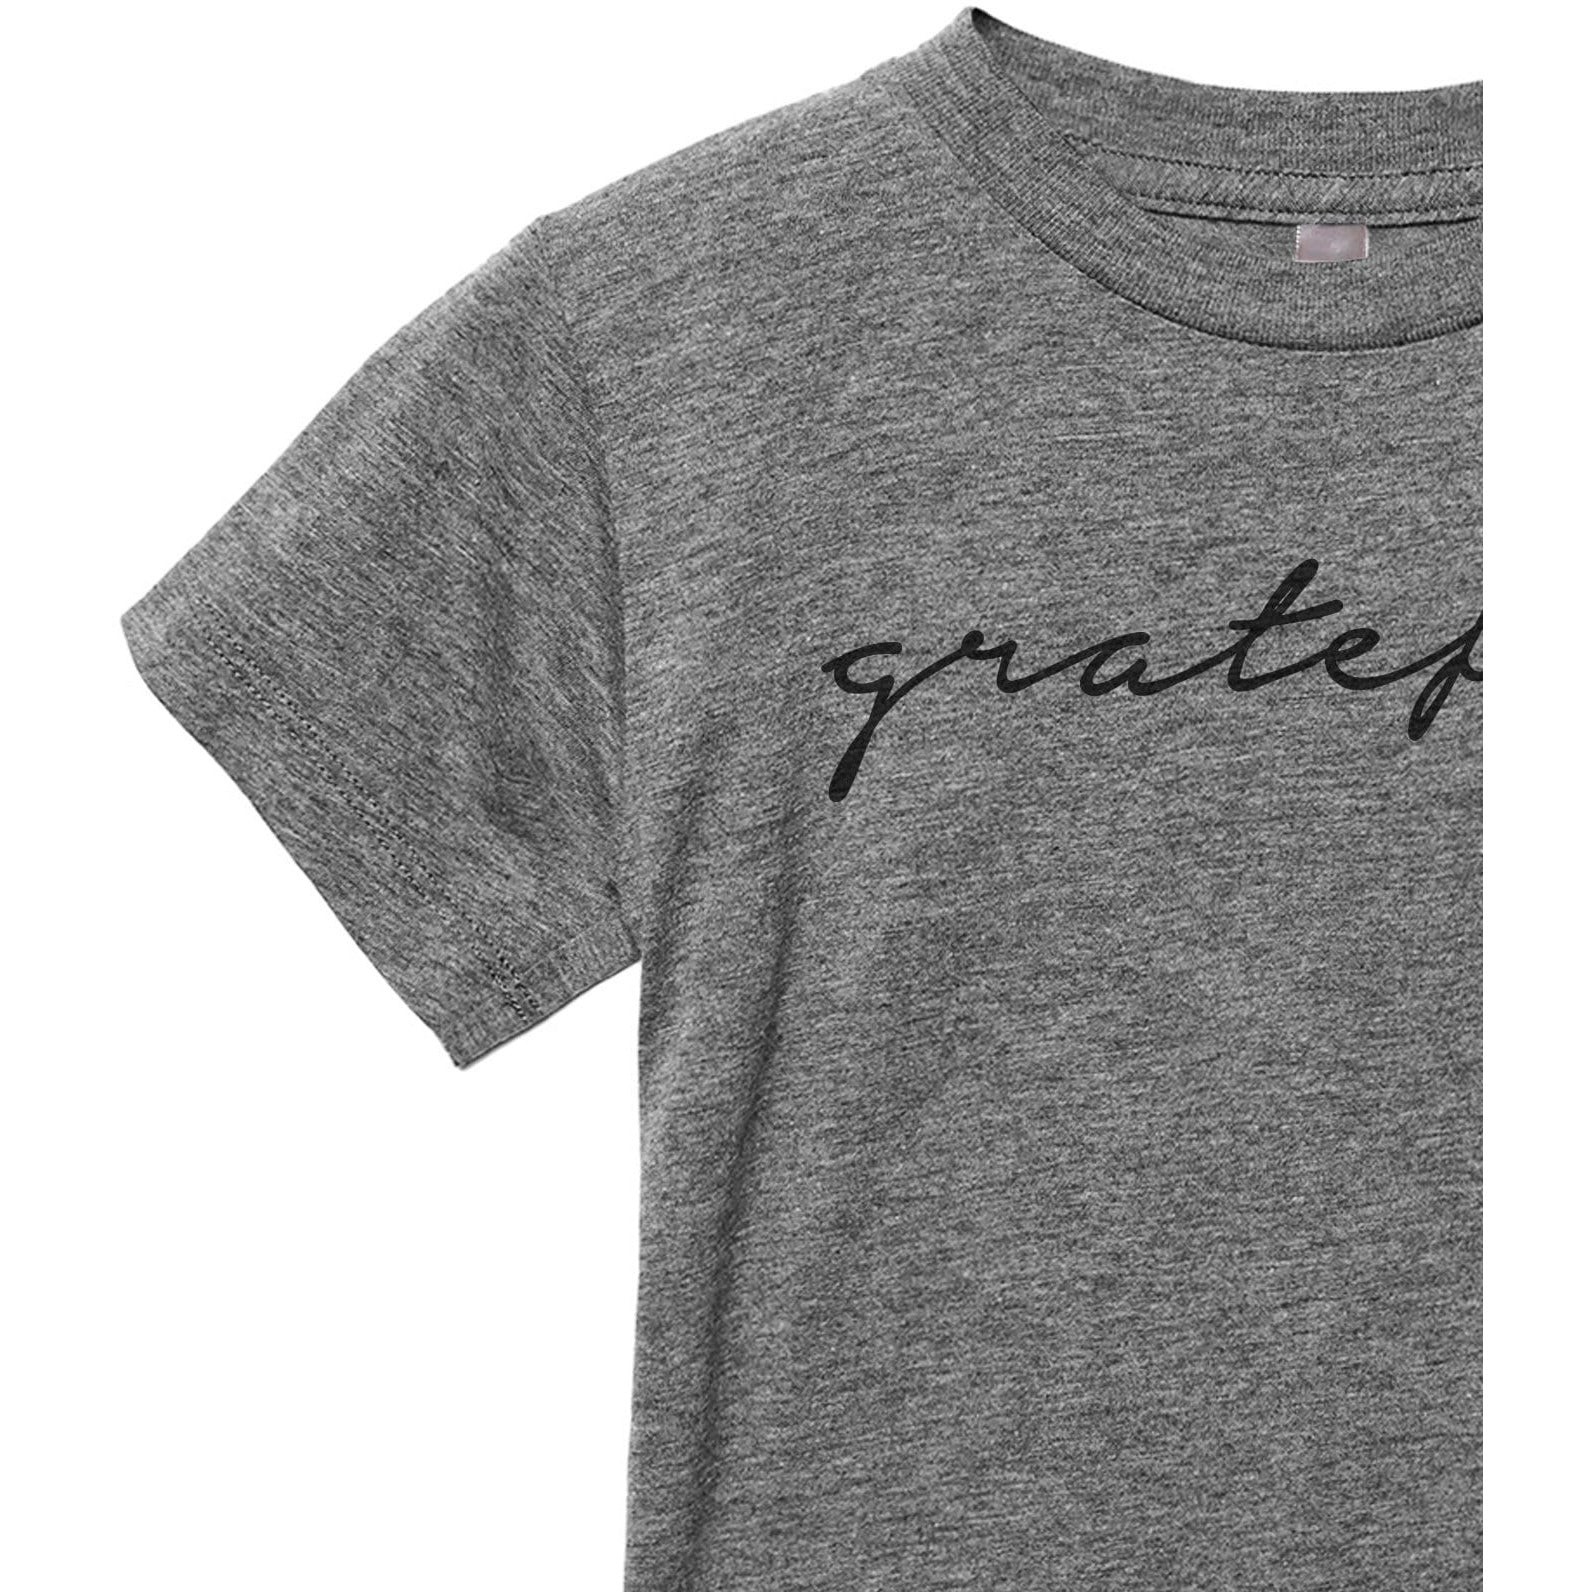 Grateful Kid Toddler's Go-To Crewneck Tee Heather Rouge Zoom Details A